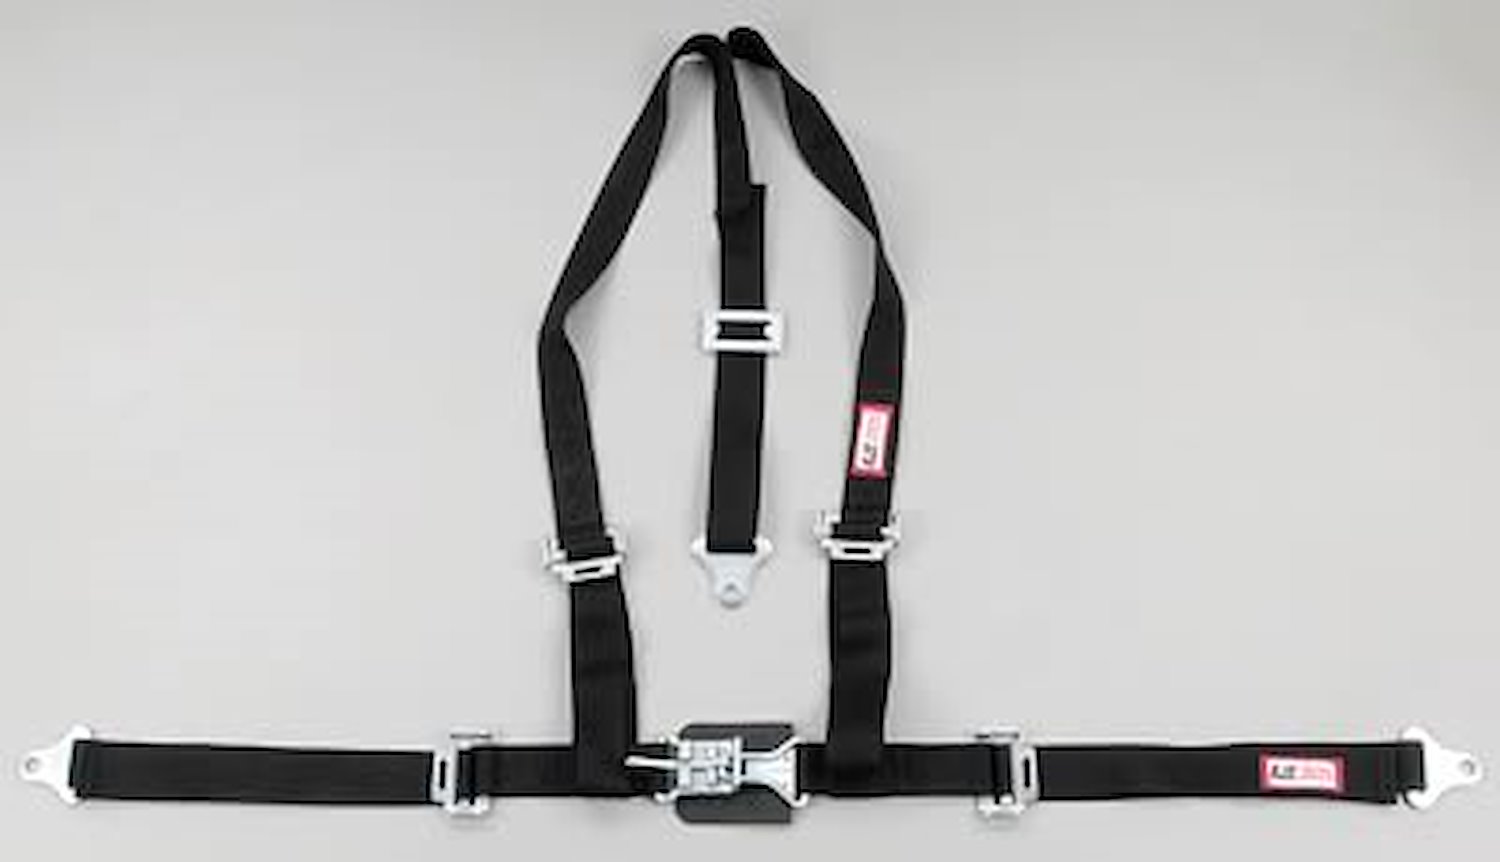 NON-SFI L&L HARNESS 2 PULL UP Lap Belt SNAP SEWN IN 2 S.H. Y FLOOR Mount w/STERNUM STRAP WRAP/SNAP ORANGE